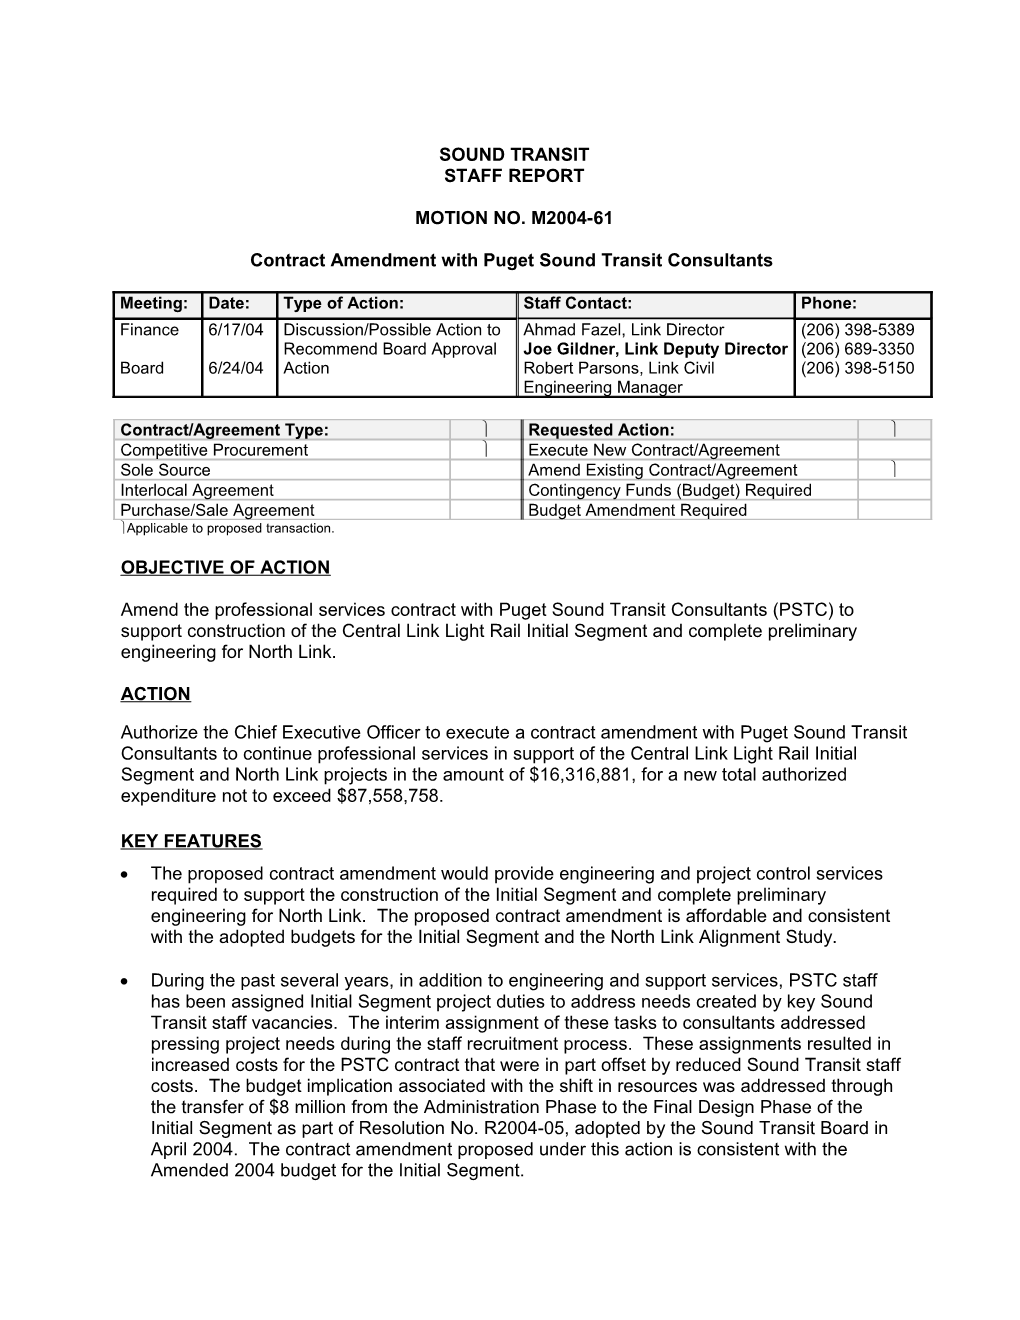 Contract Amendment with Puget Sound Transit Consultants